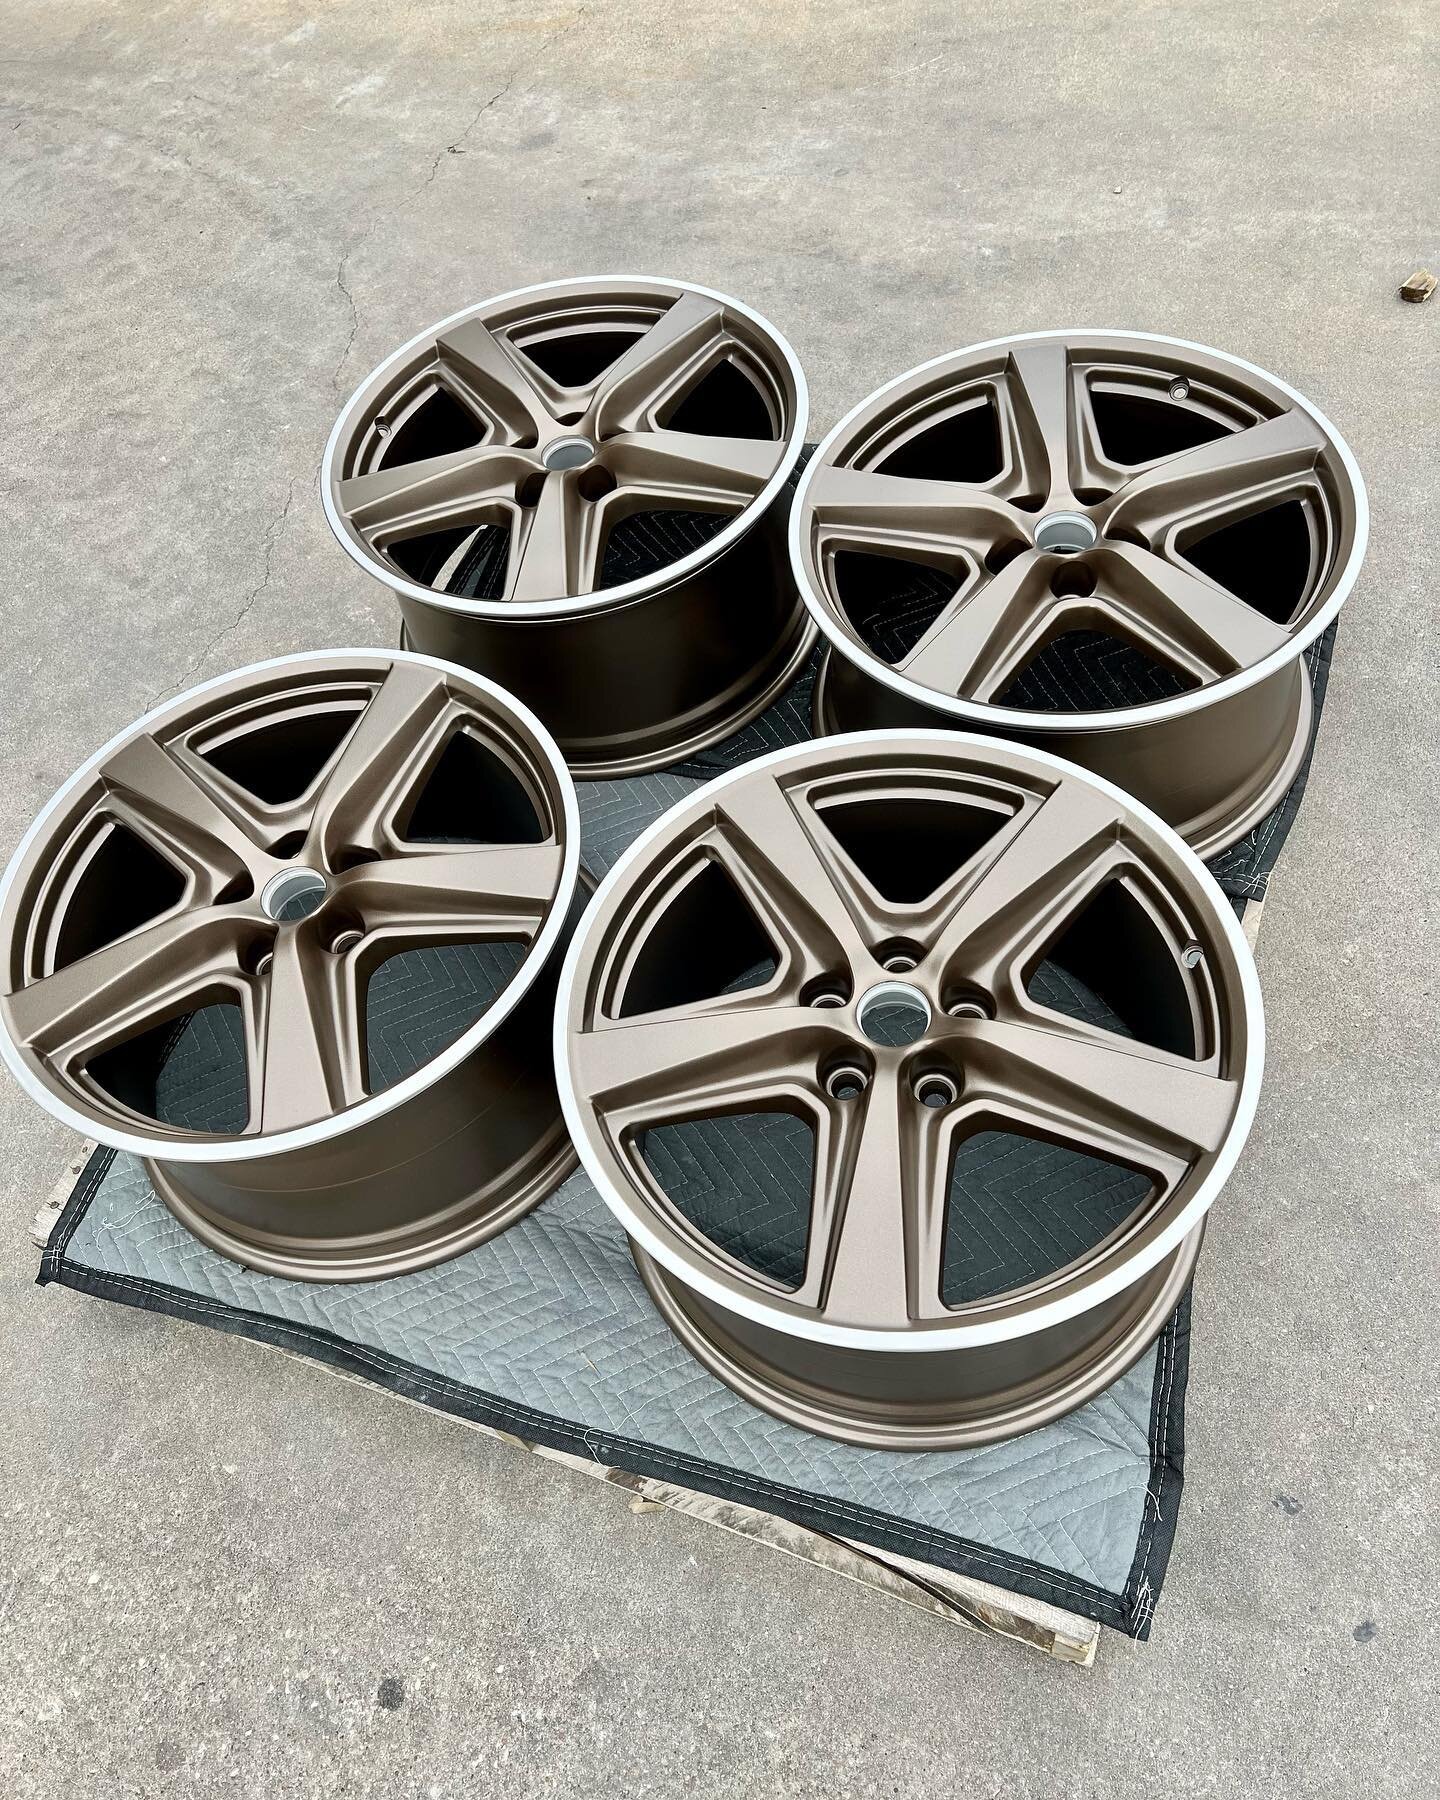 Finishing this Friday up with a custom set of Mustang Mach 1 wheels. 👌